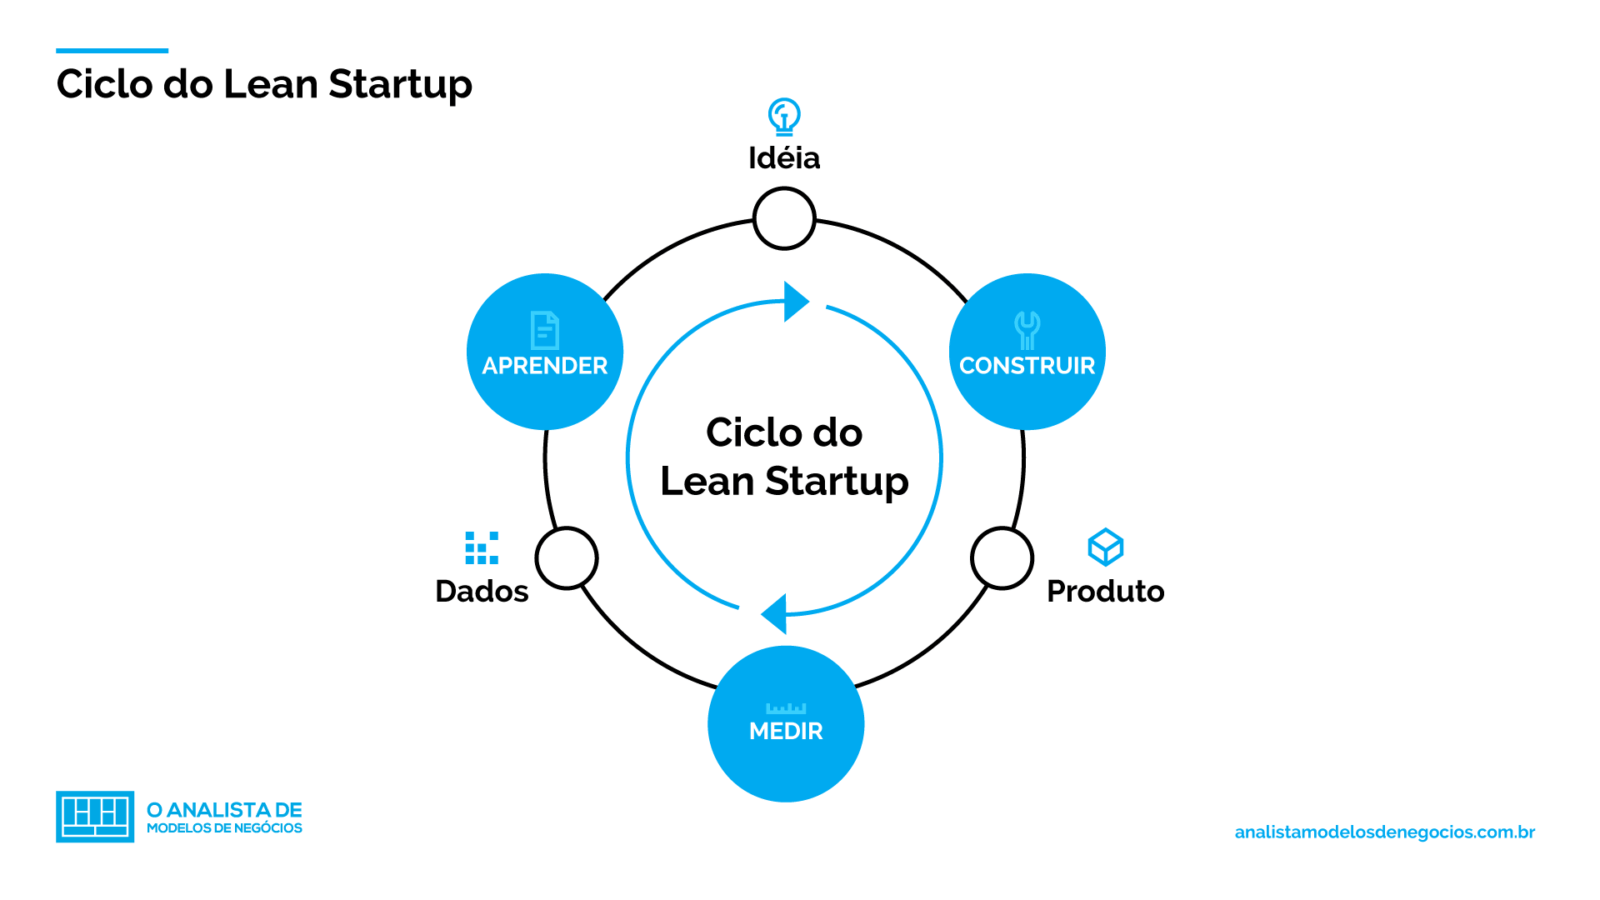 Ciclo do Lean Startup